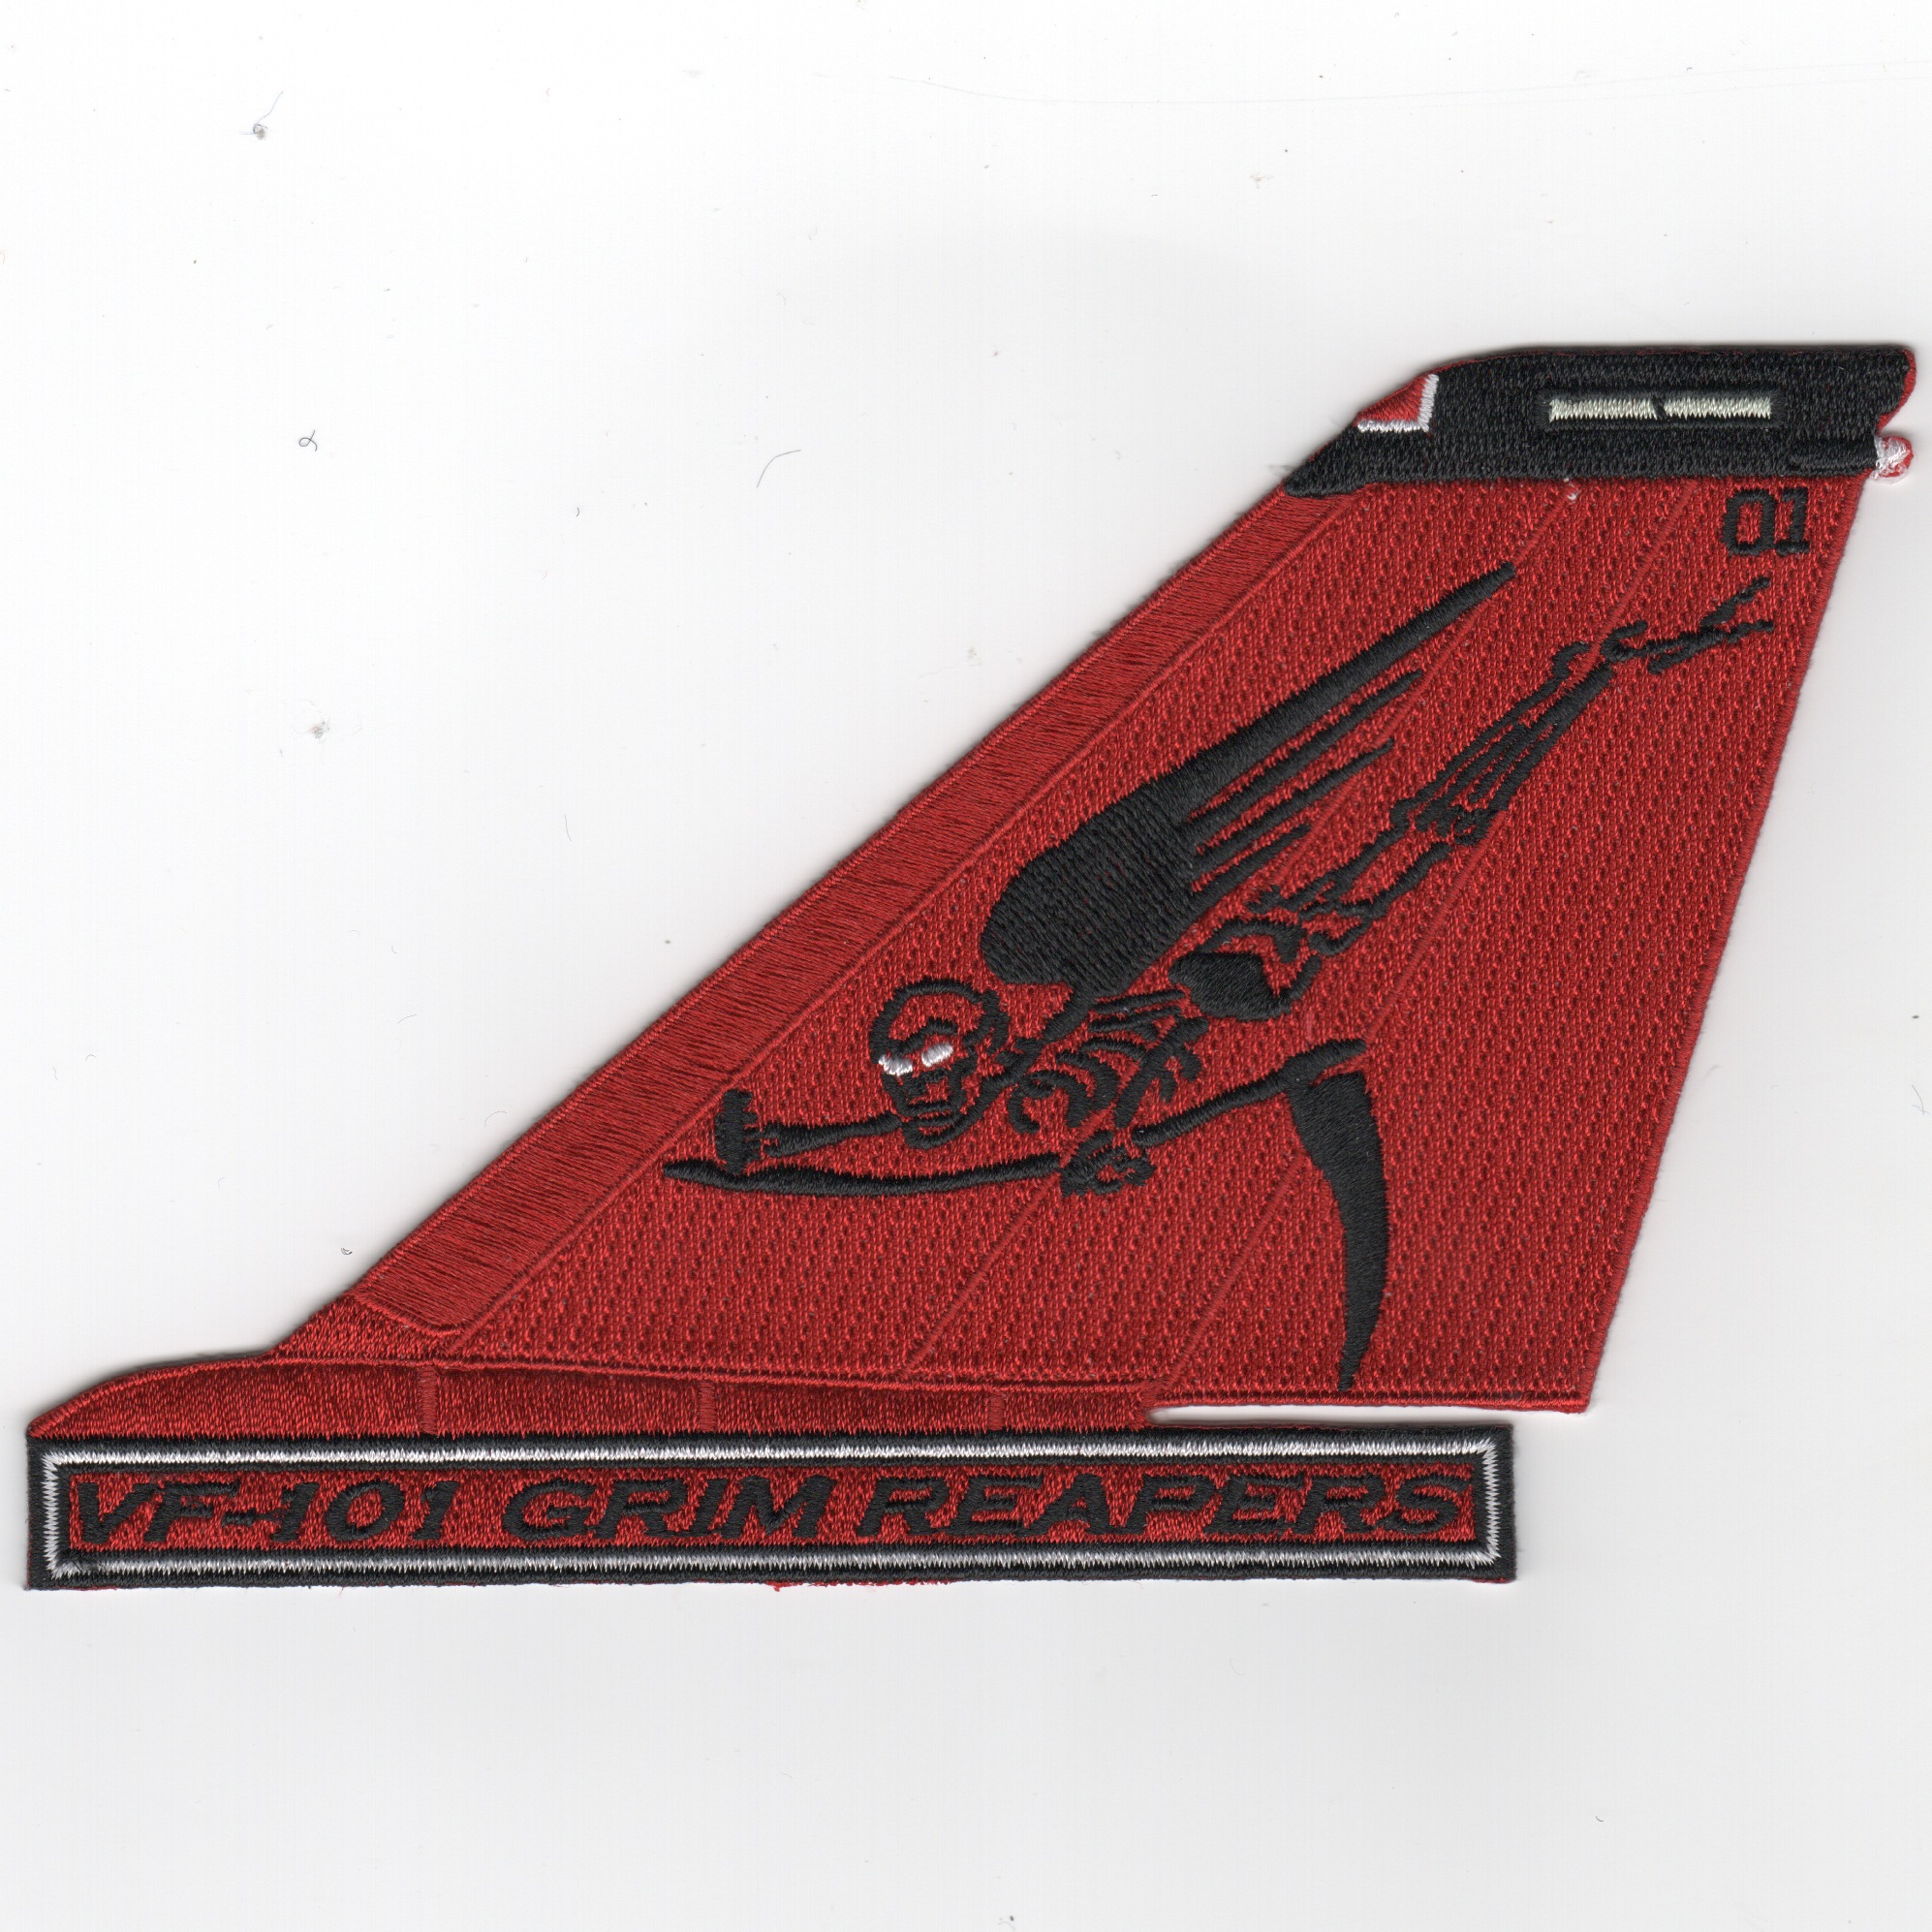 VF-101 F-14 Tail (All Red/Flying Moe/Text)